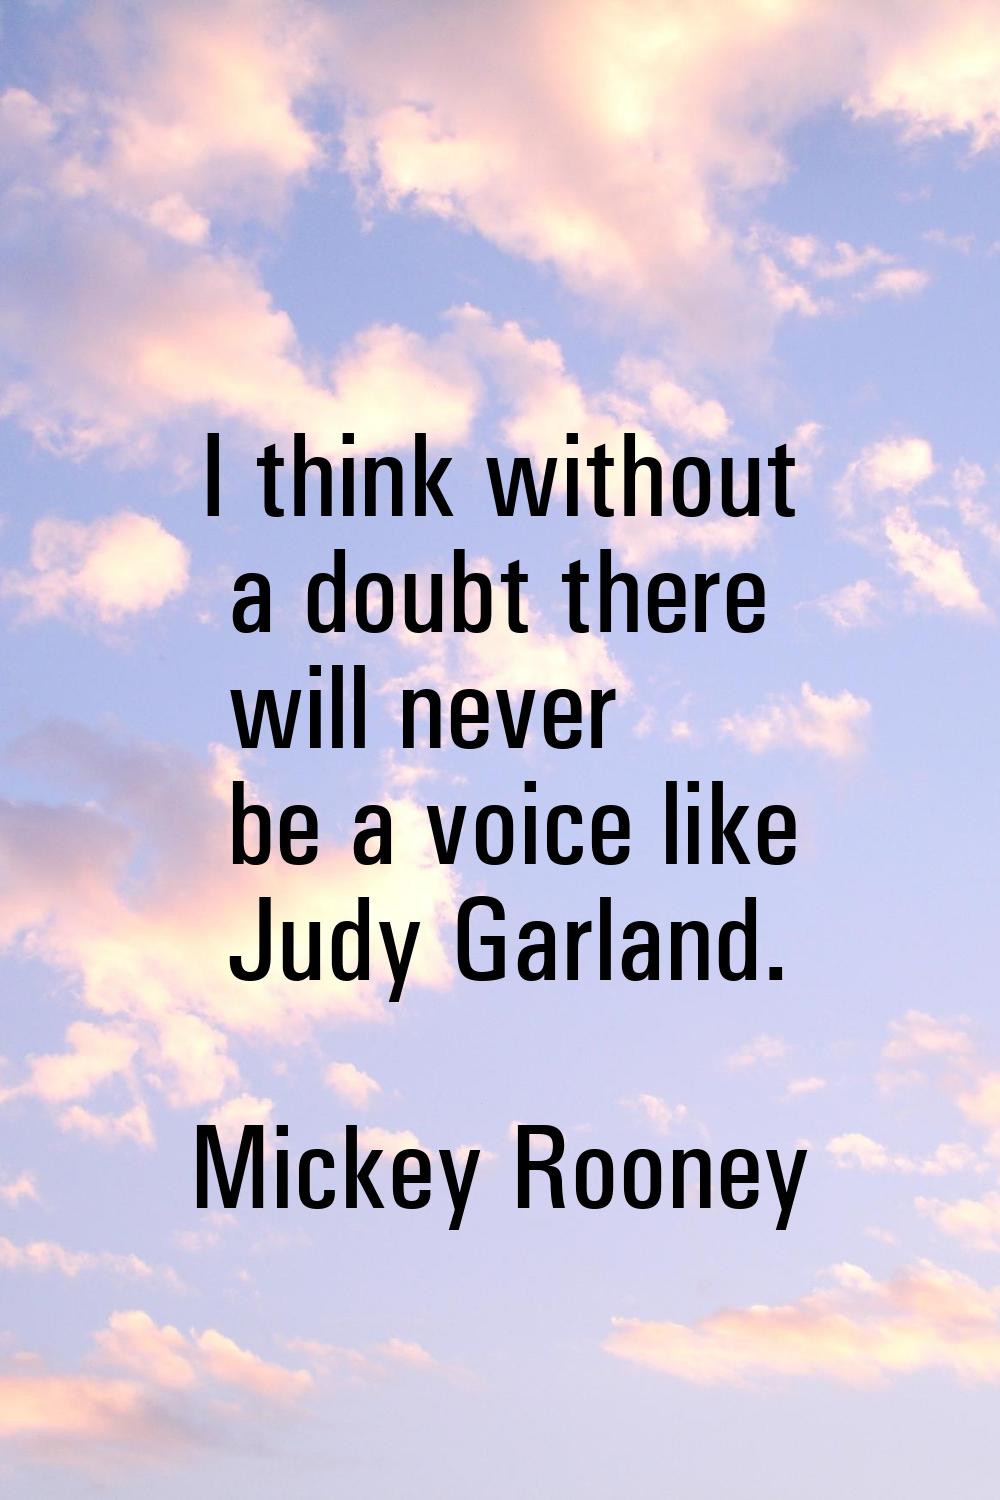 I think without a doubt there will never be a voice like Judy Garland.